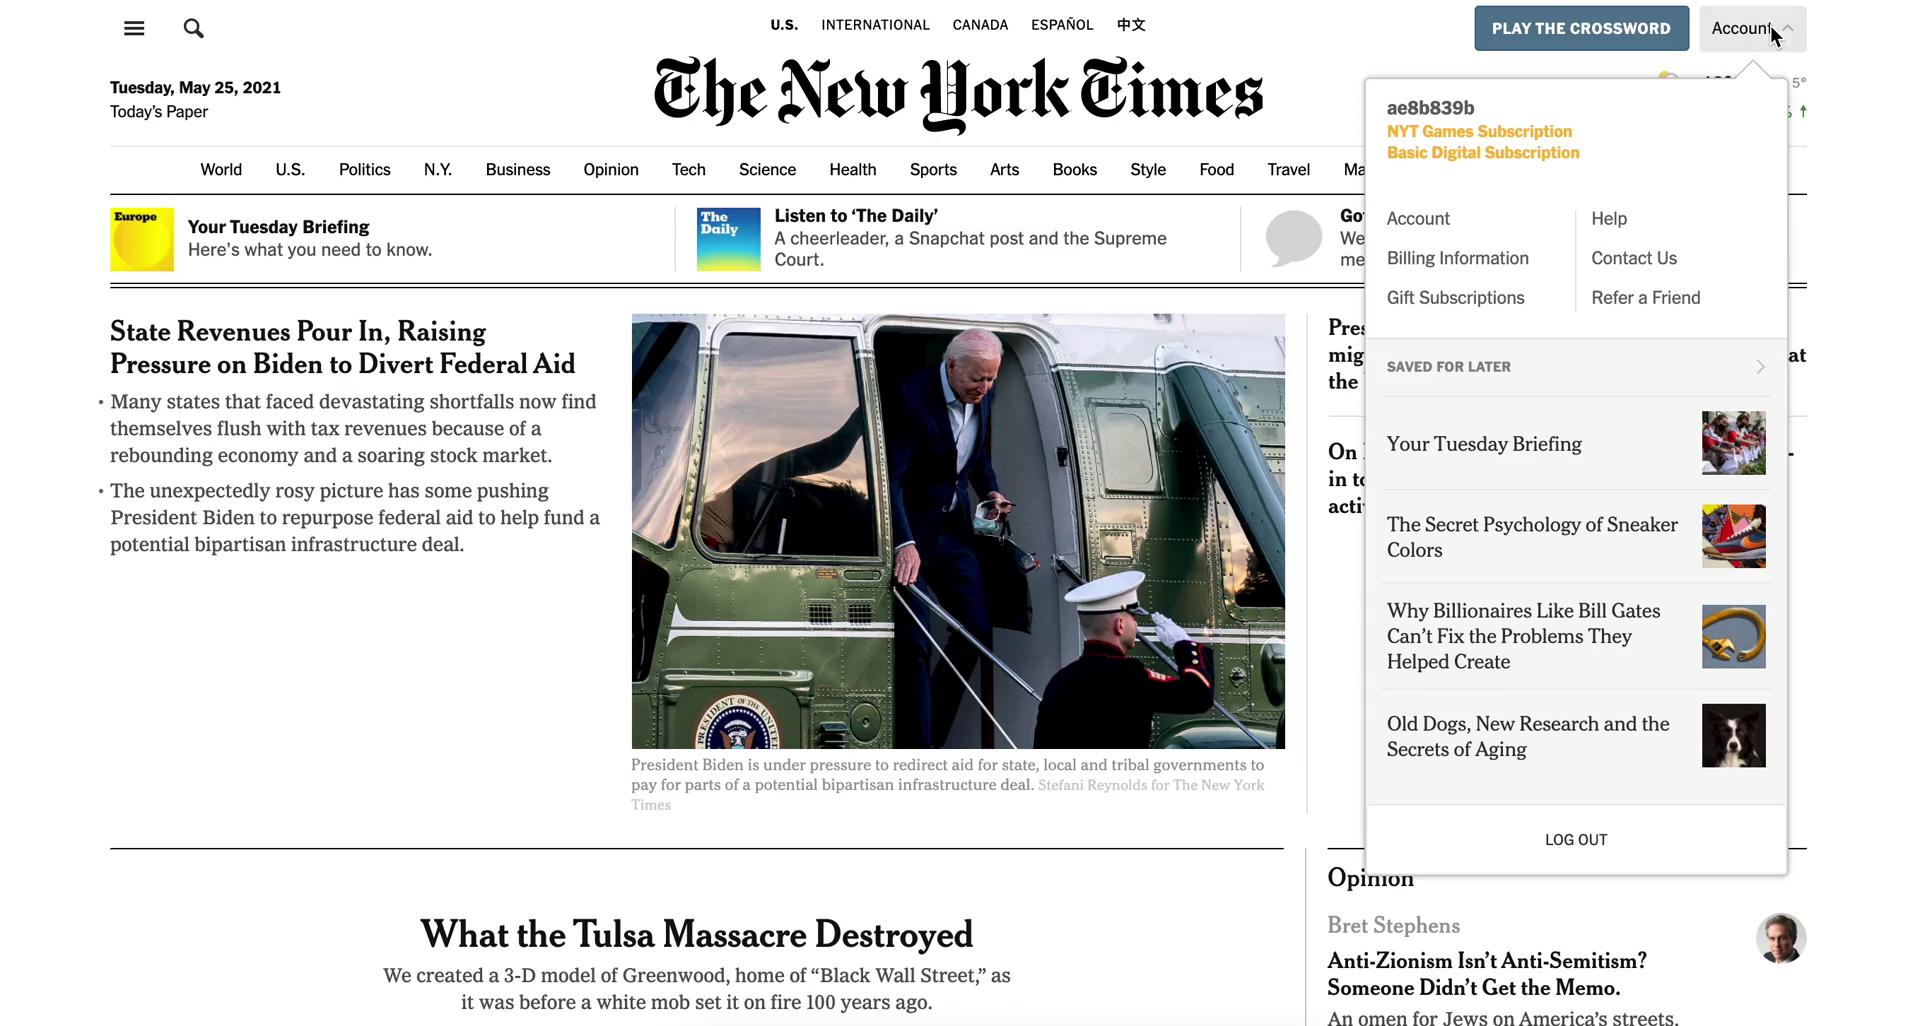 Screenshot of Cancelling your subscription on The New York Times